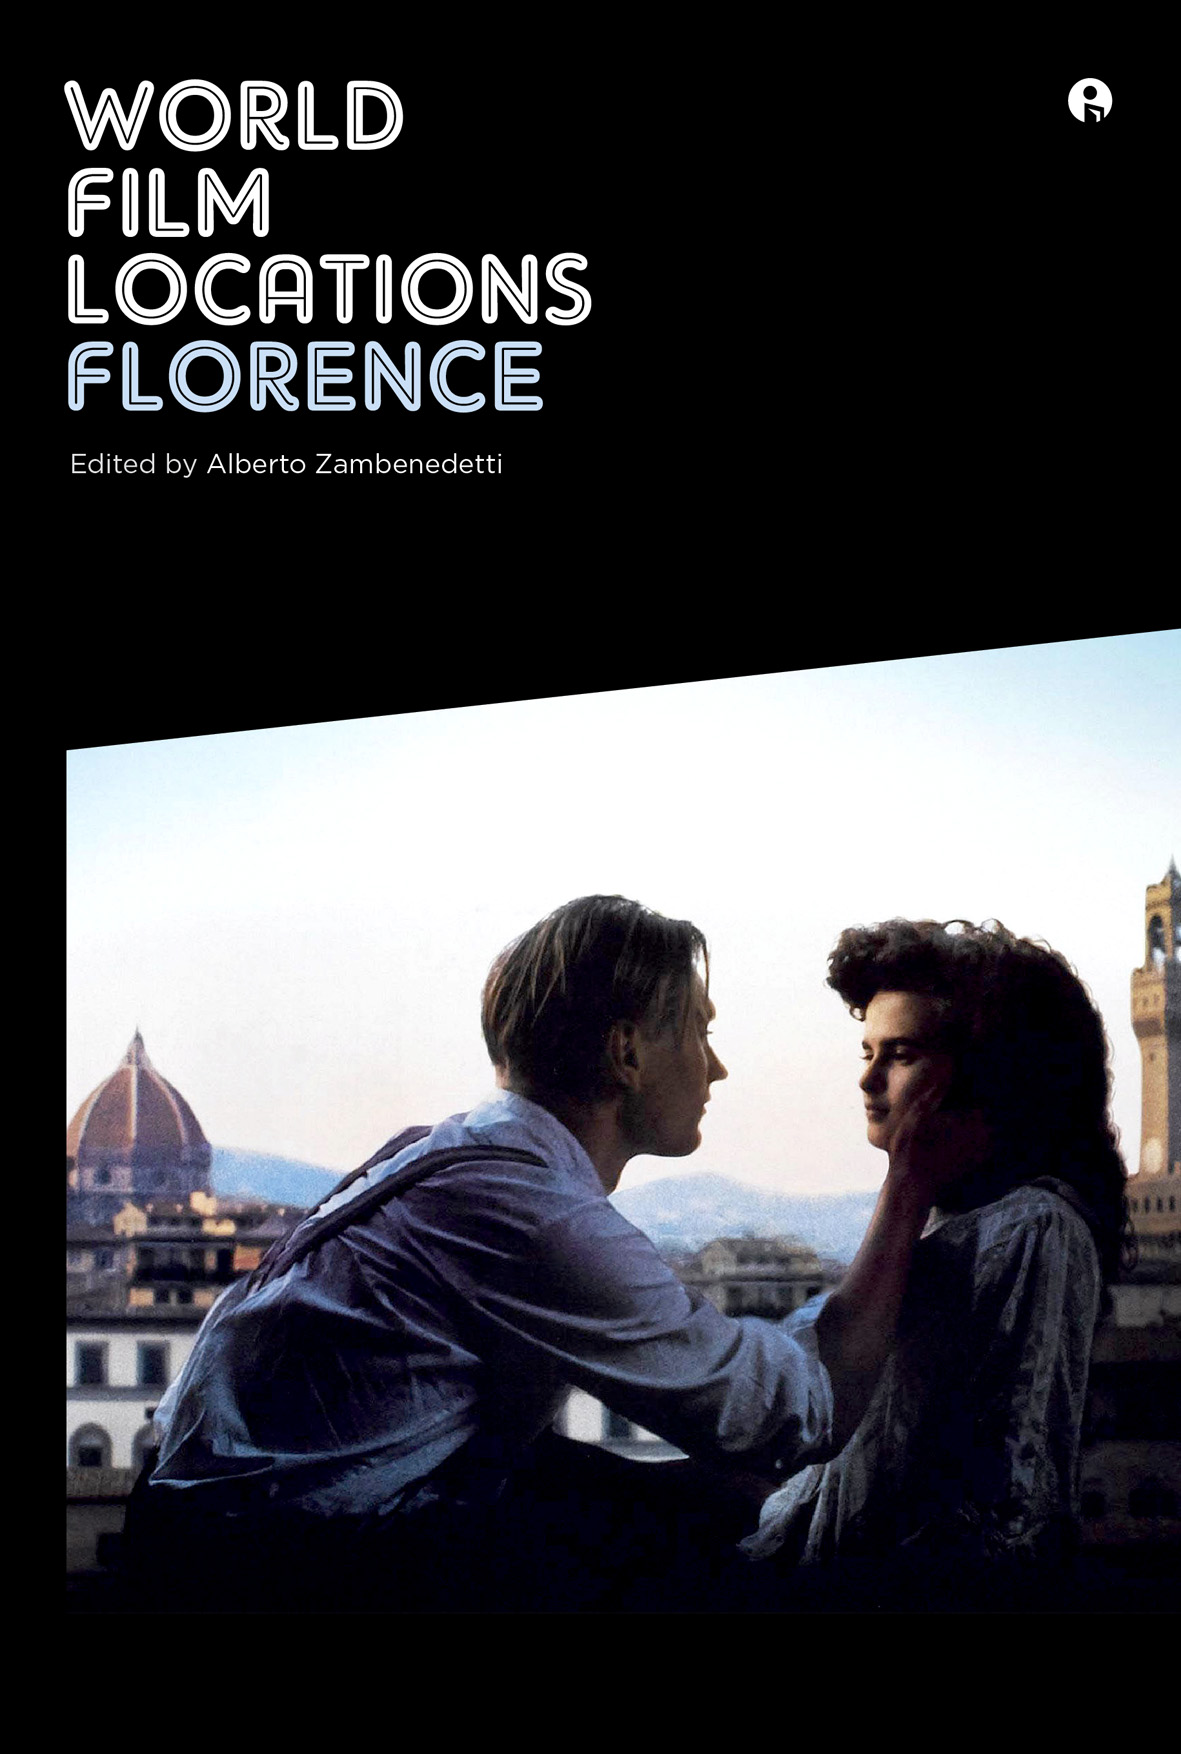 Book cover of World Film Locations: Florence with scene from A Room With a View of Julian Sands and Helena Bonham Carter